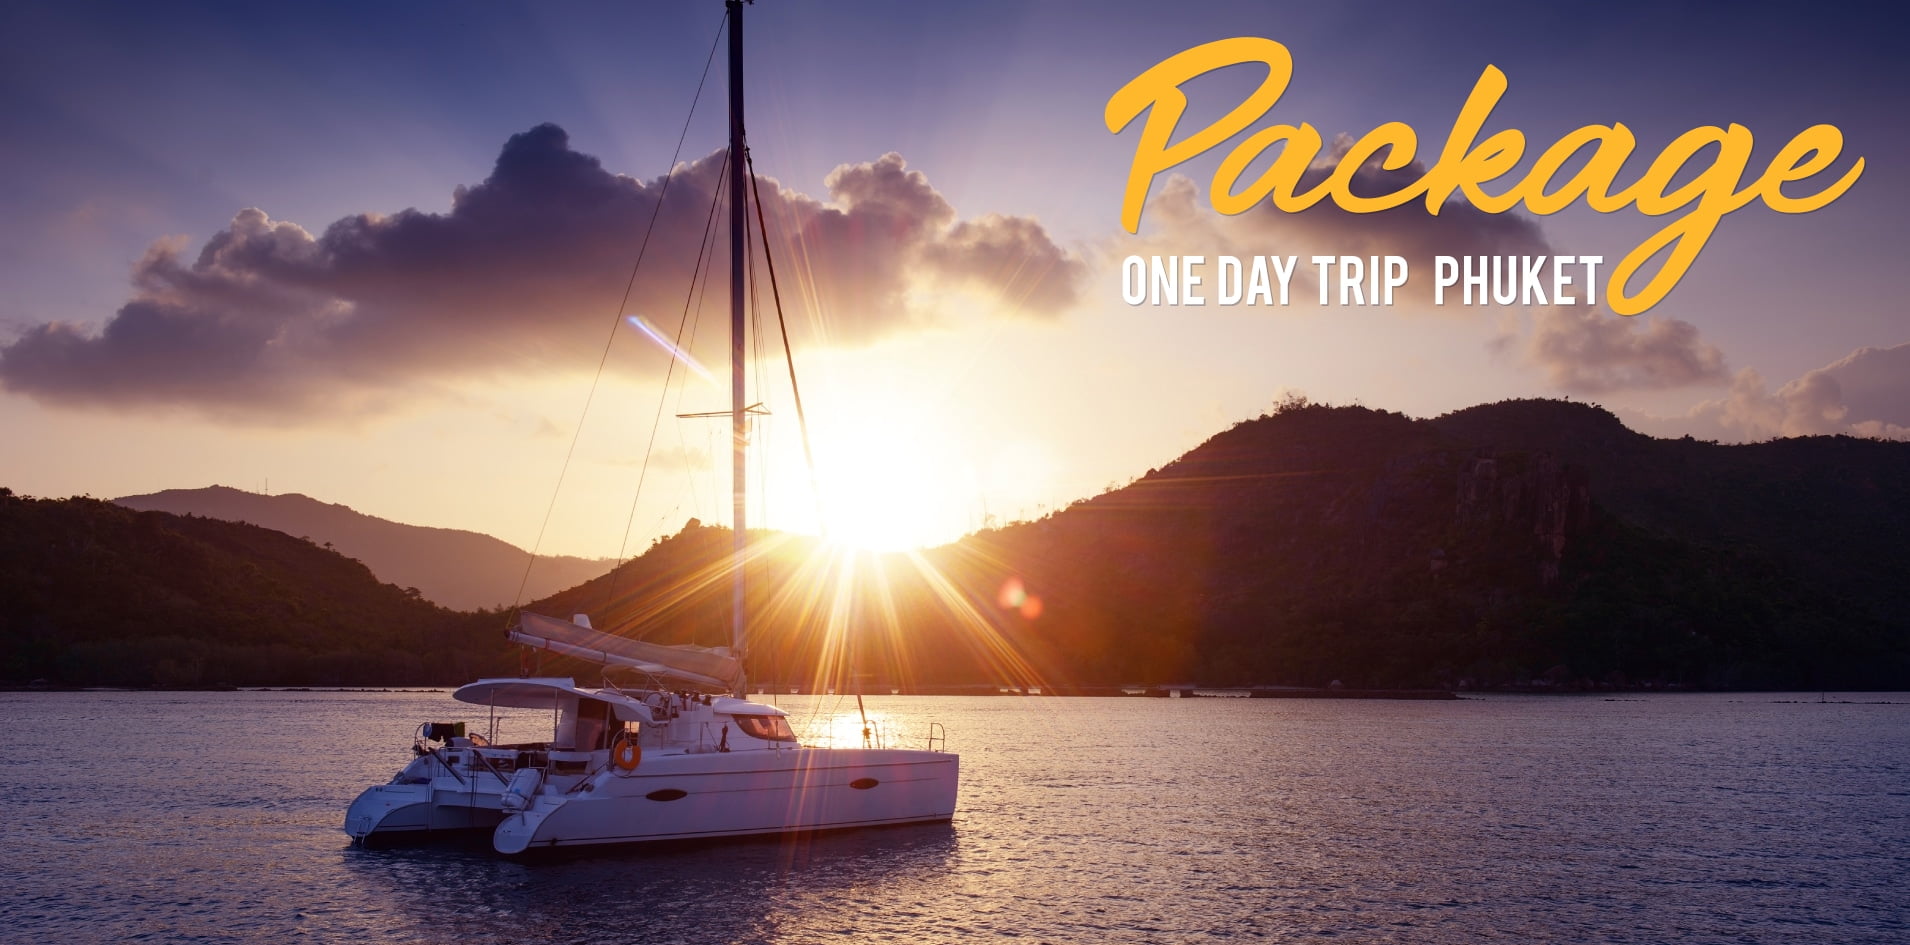 PACKAGE PHUKET : 1 DAY TRIP  SUNSET  ON YACHT